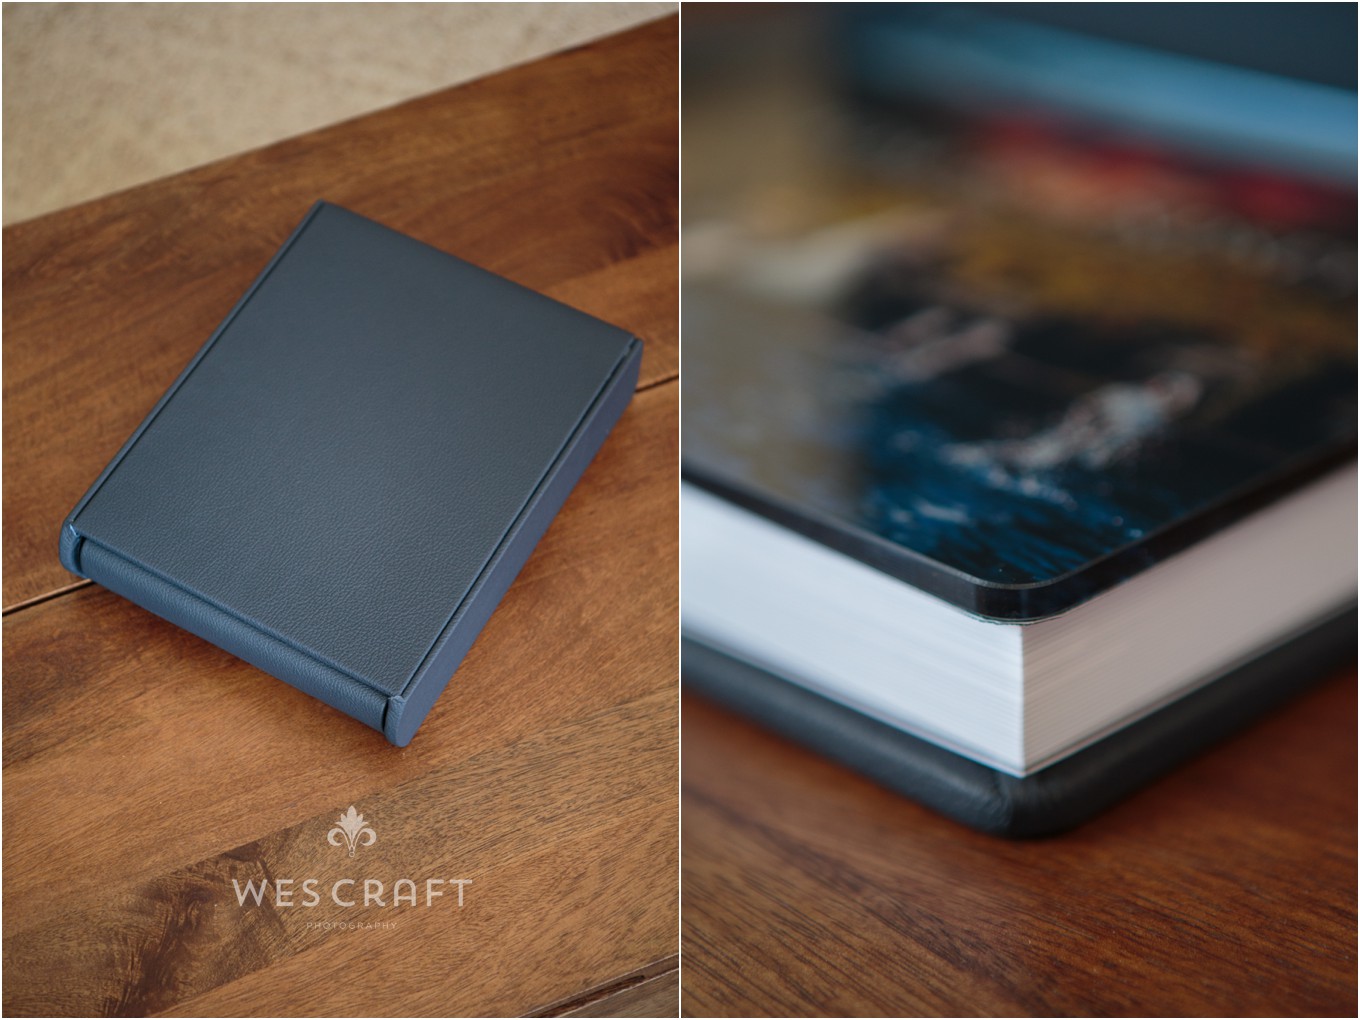 This Italian printed and bound album was given a deep blue leather binding with an acrylic photographic cover.